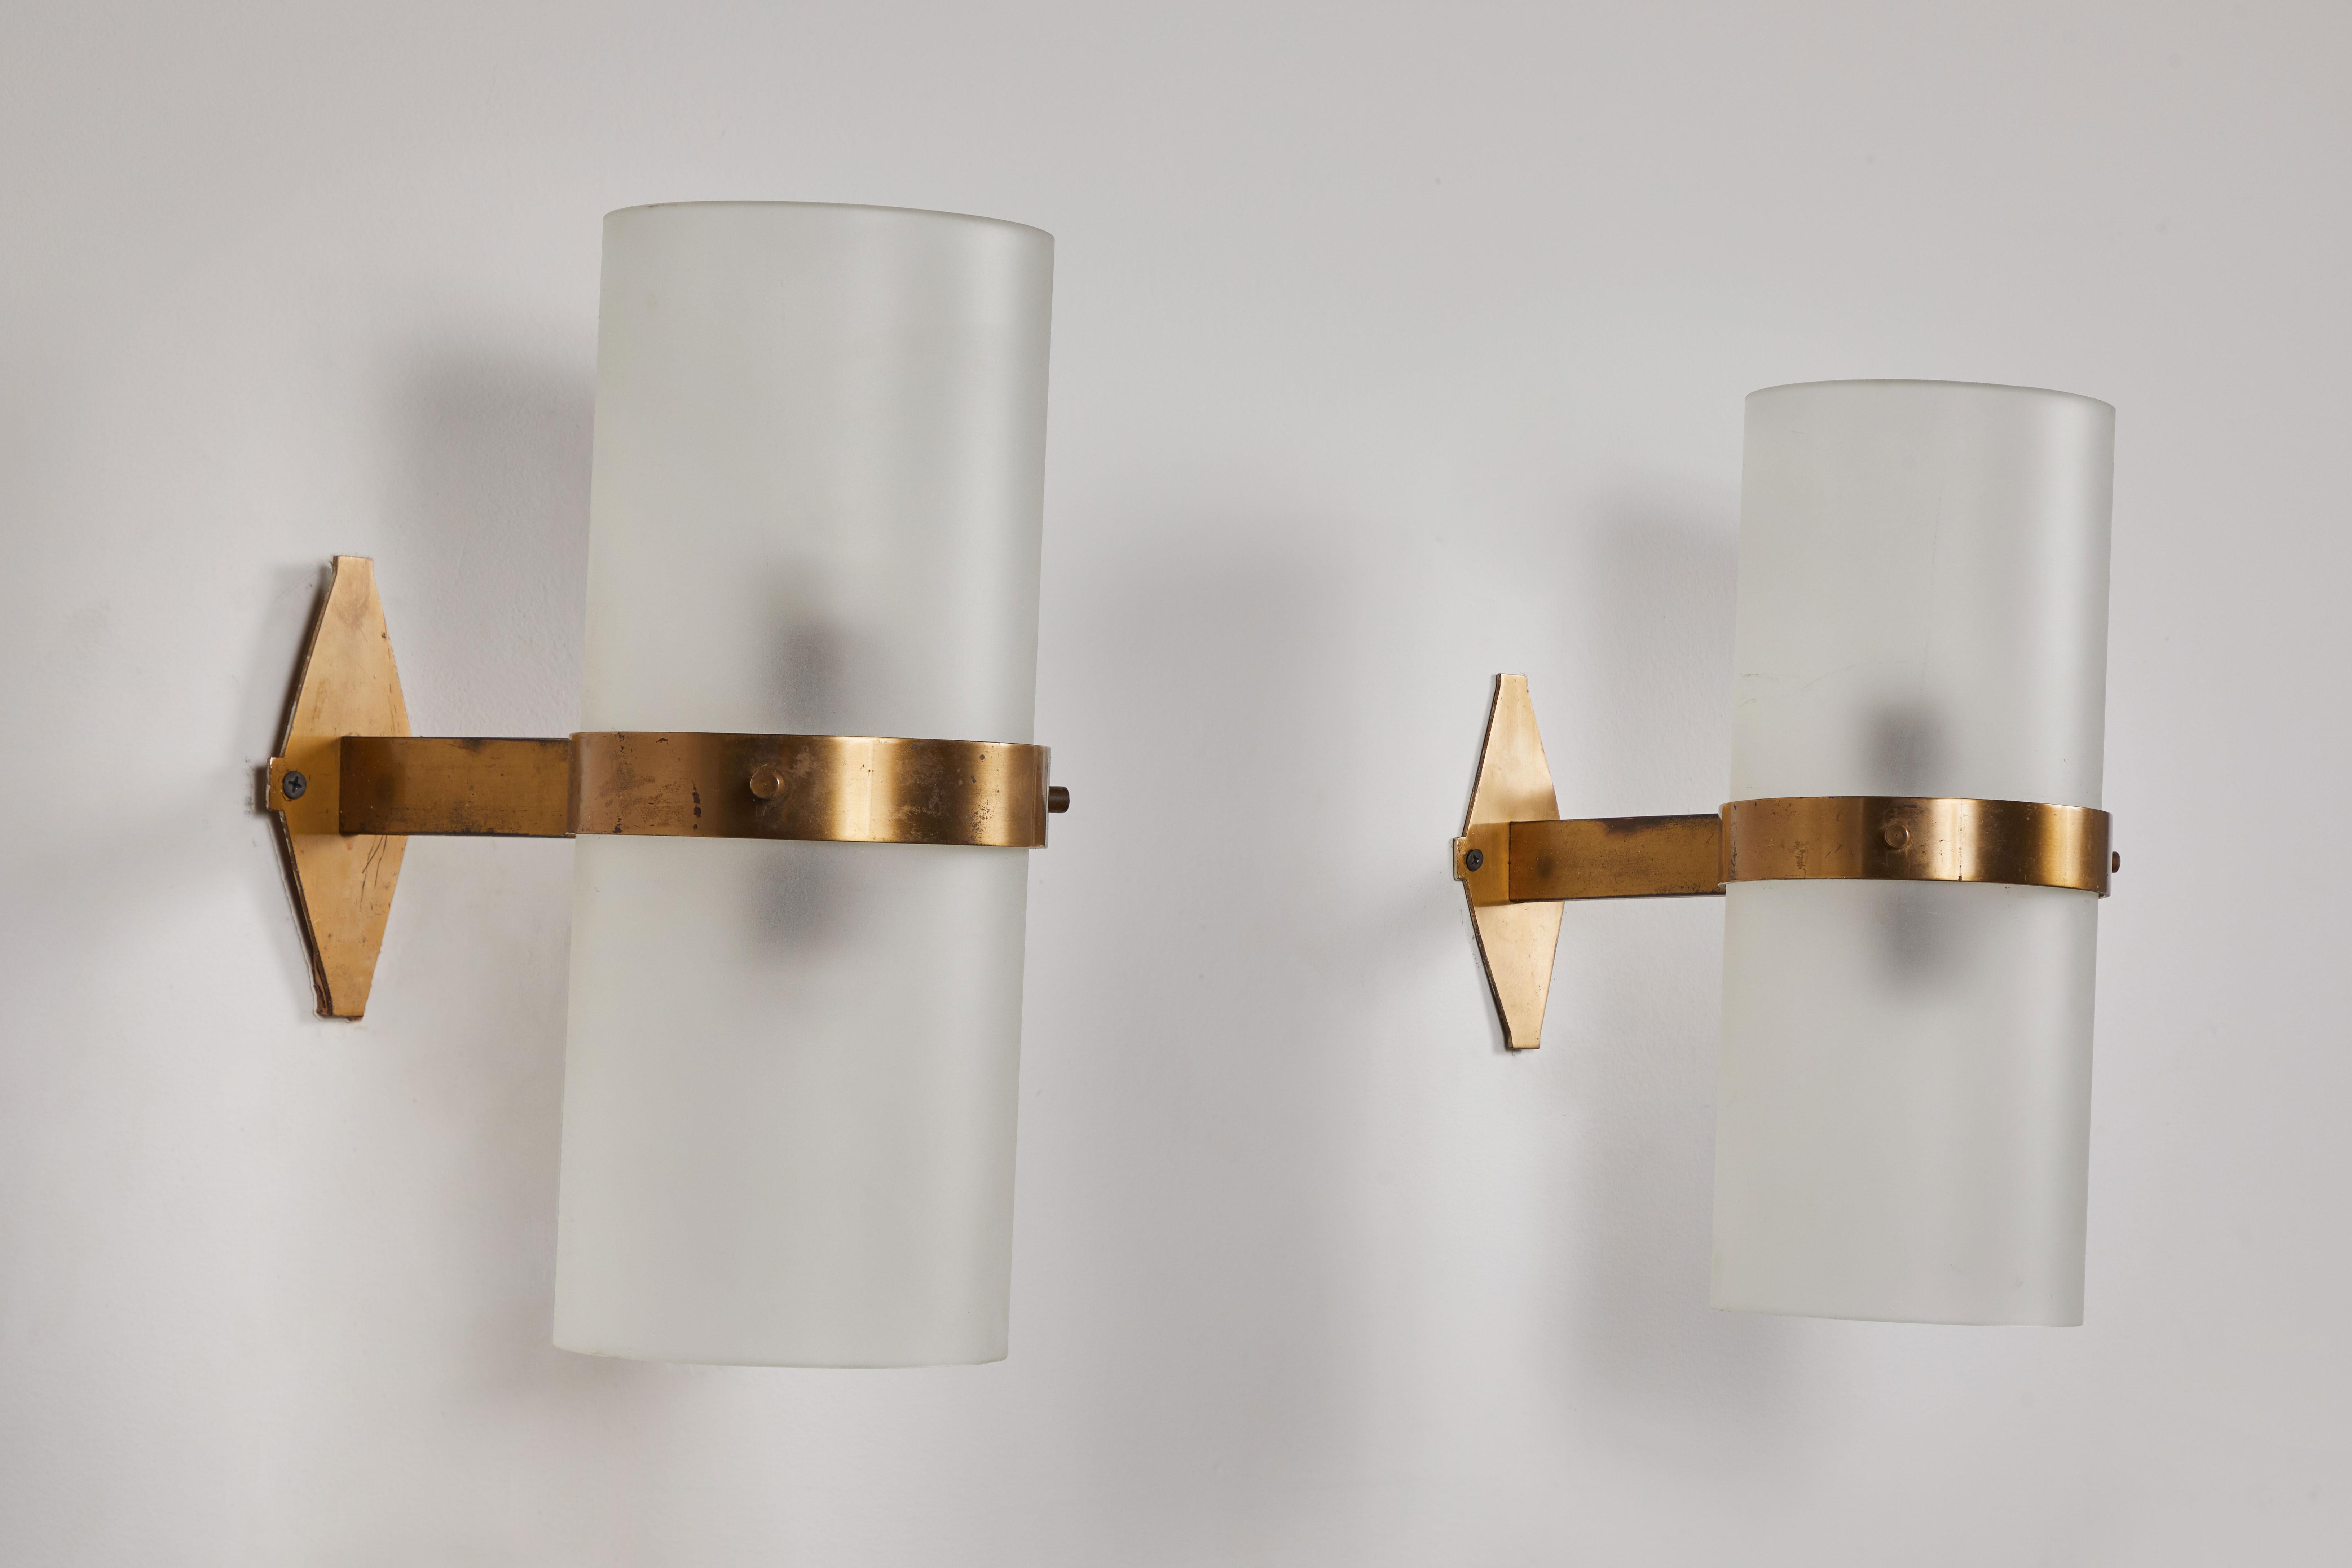 Italian Pair of Model B324 Sconces by Candle